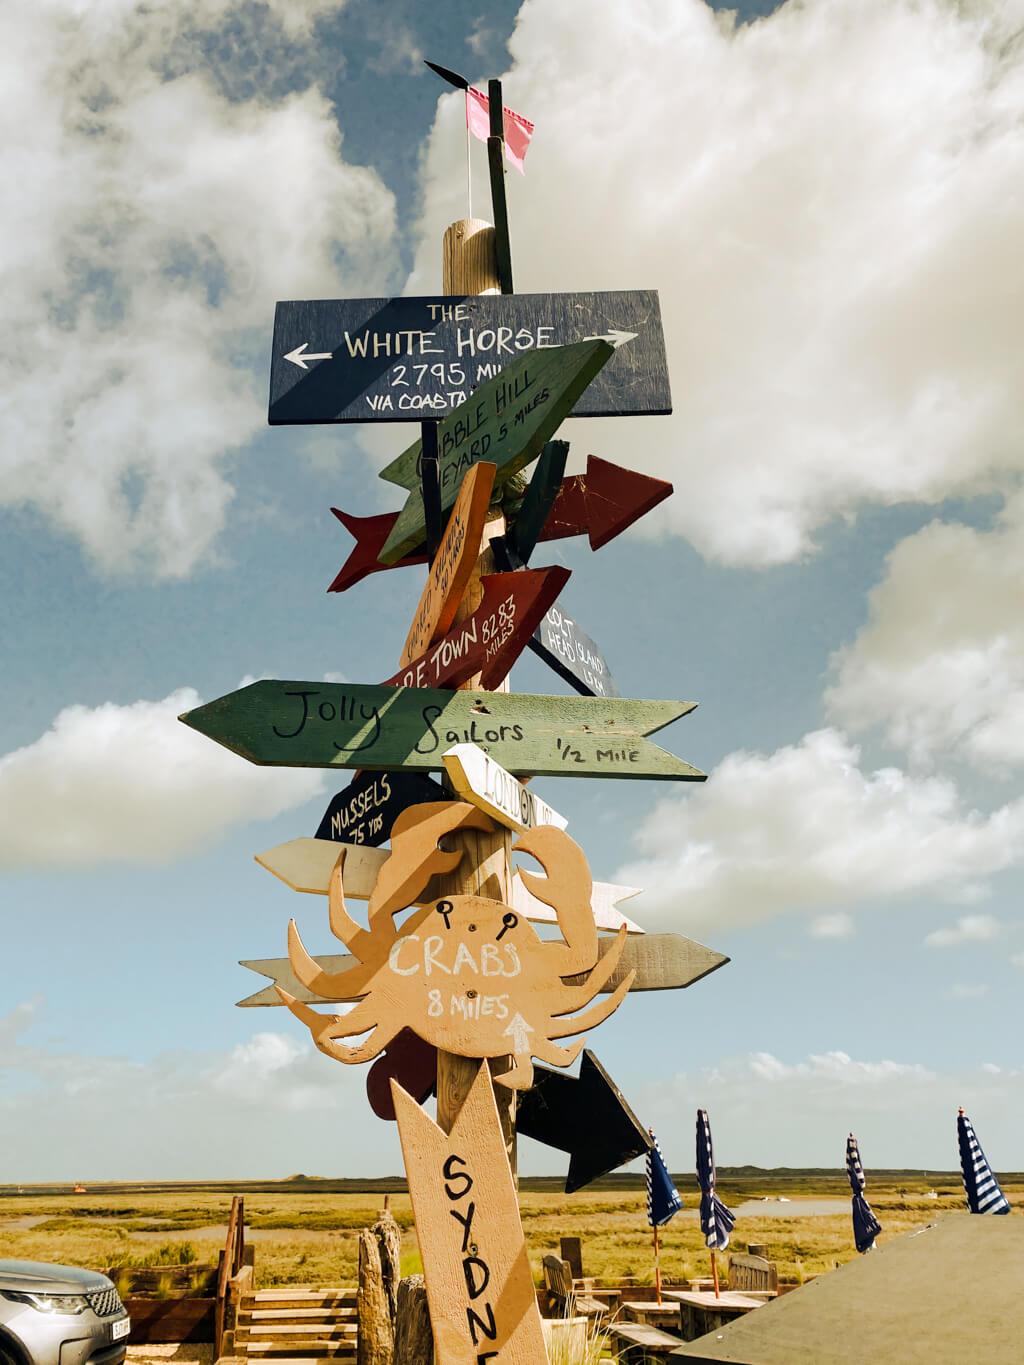 lots of fun signs by the brancaster white horse